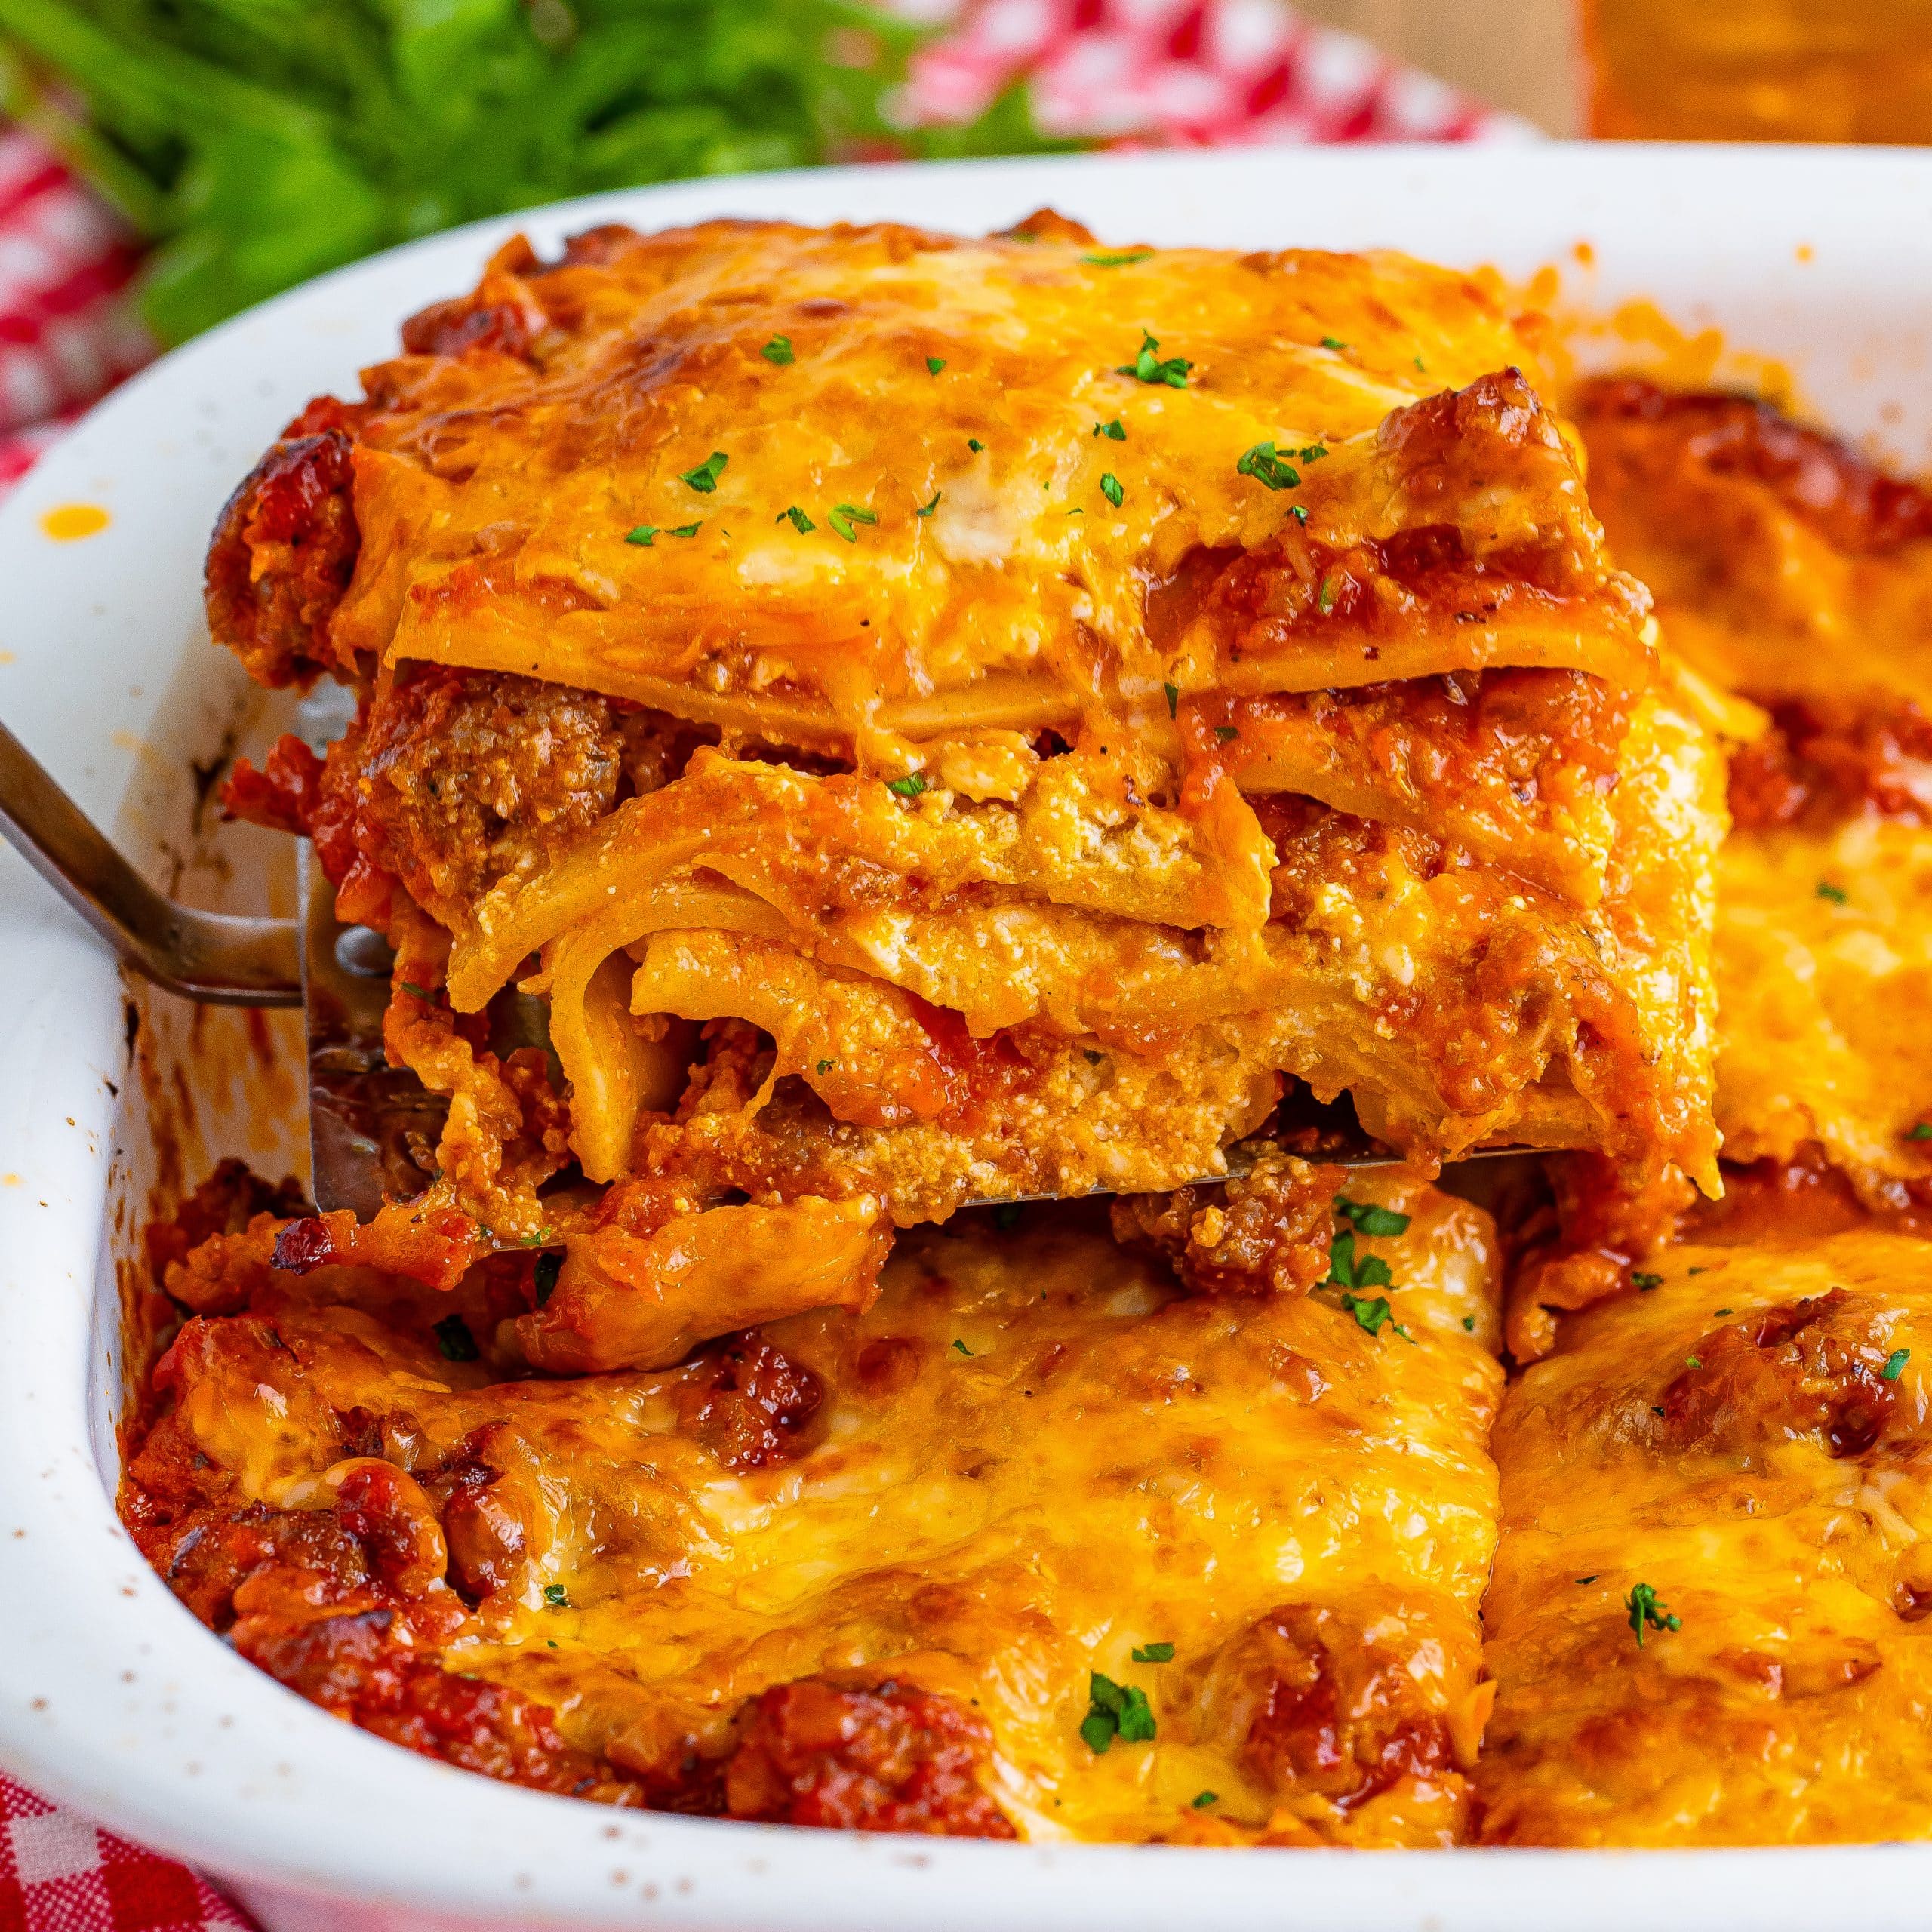 Homemade Lasagna for Two